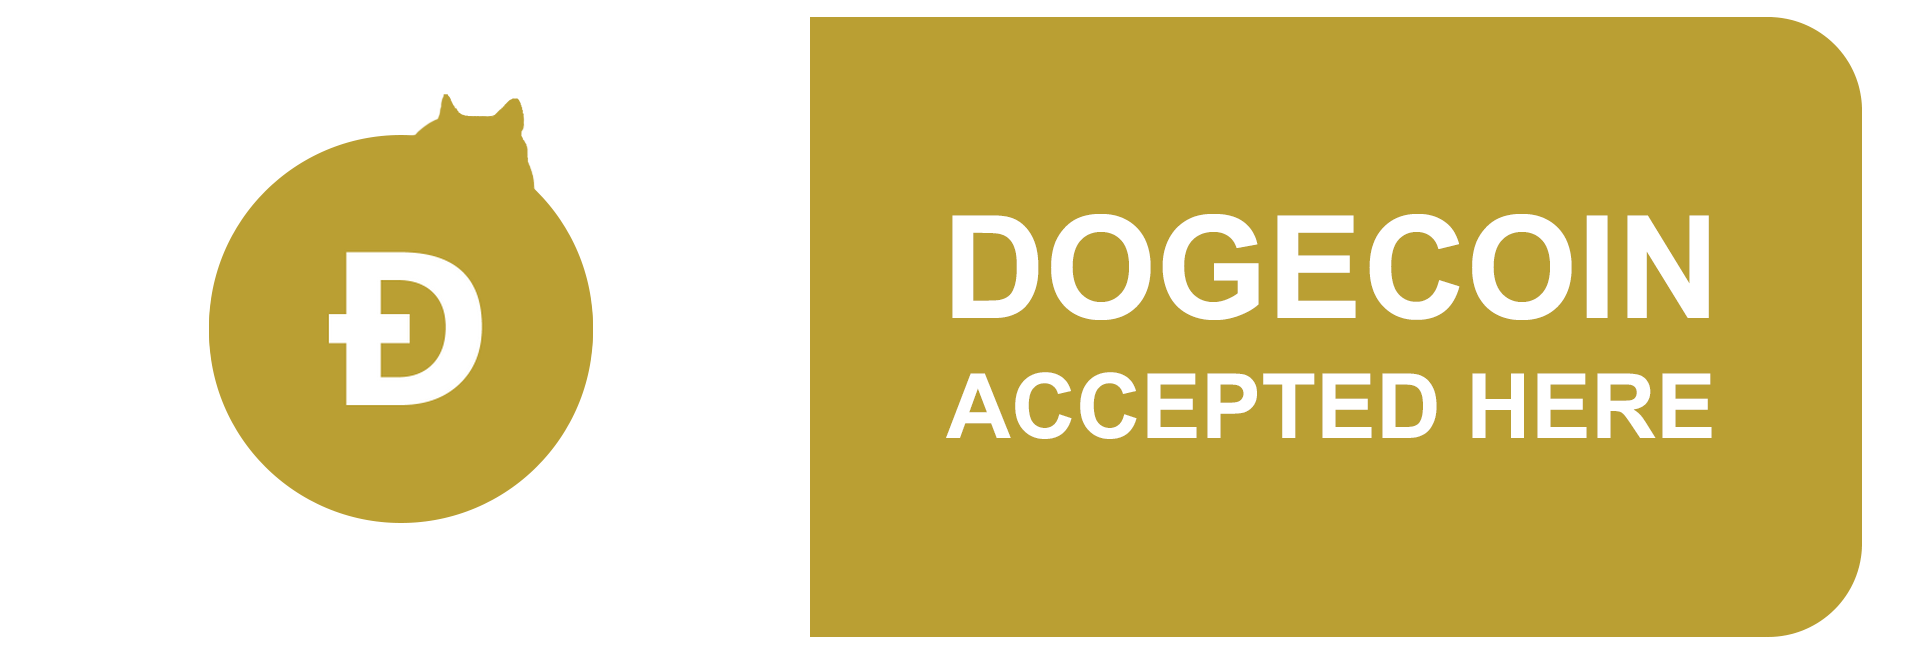 Dogecoin Logo - Updated: Dogecoin Accepted Here SIGN LOGO! : dogecoin